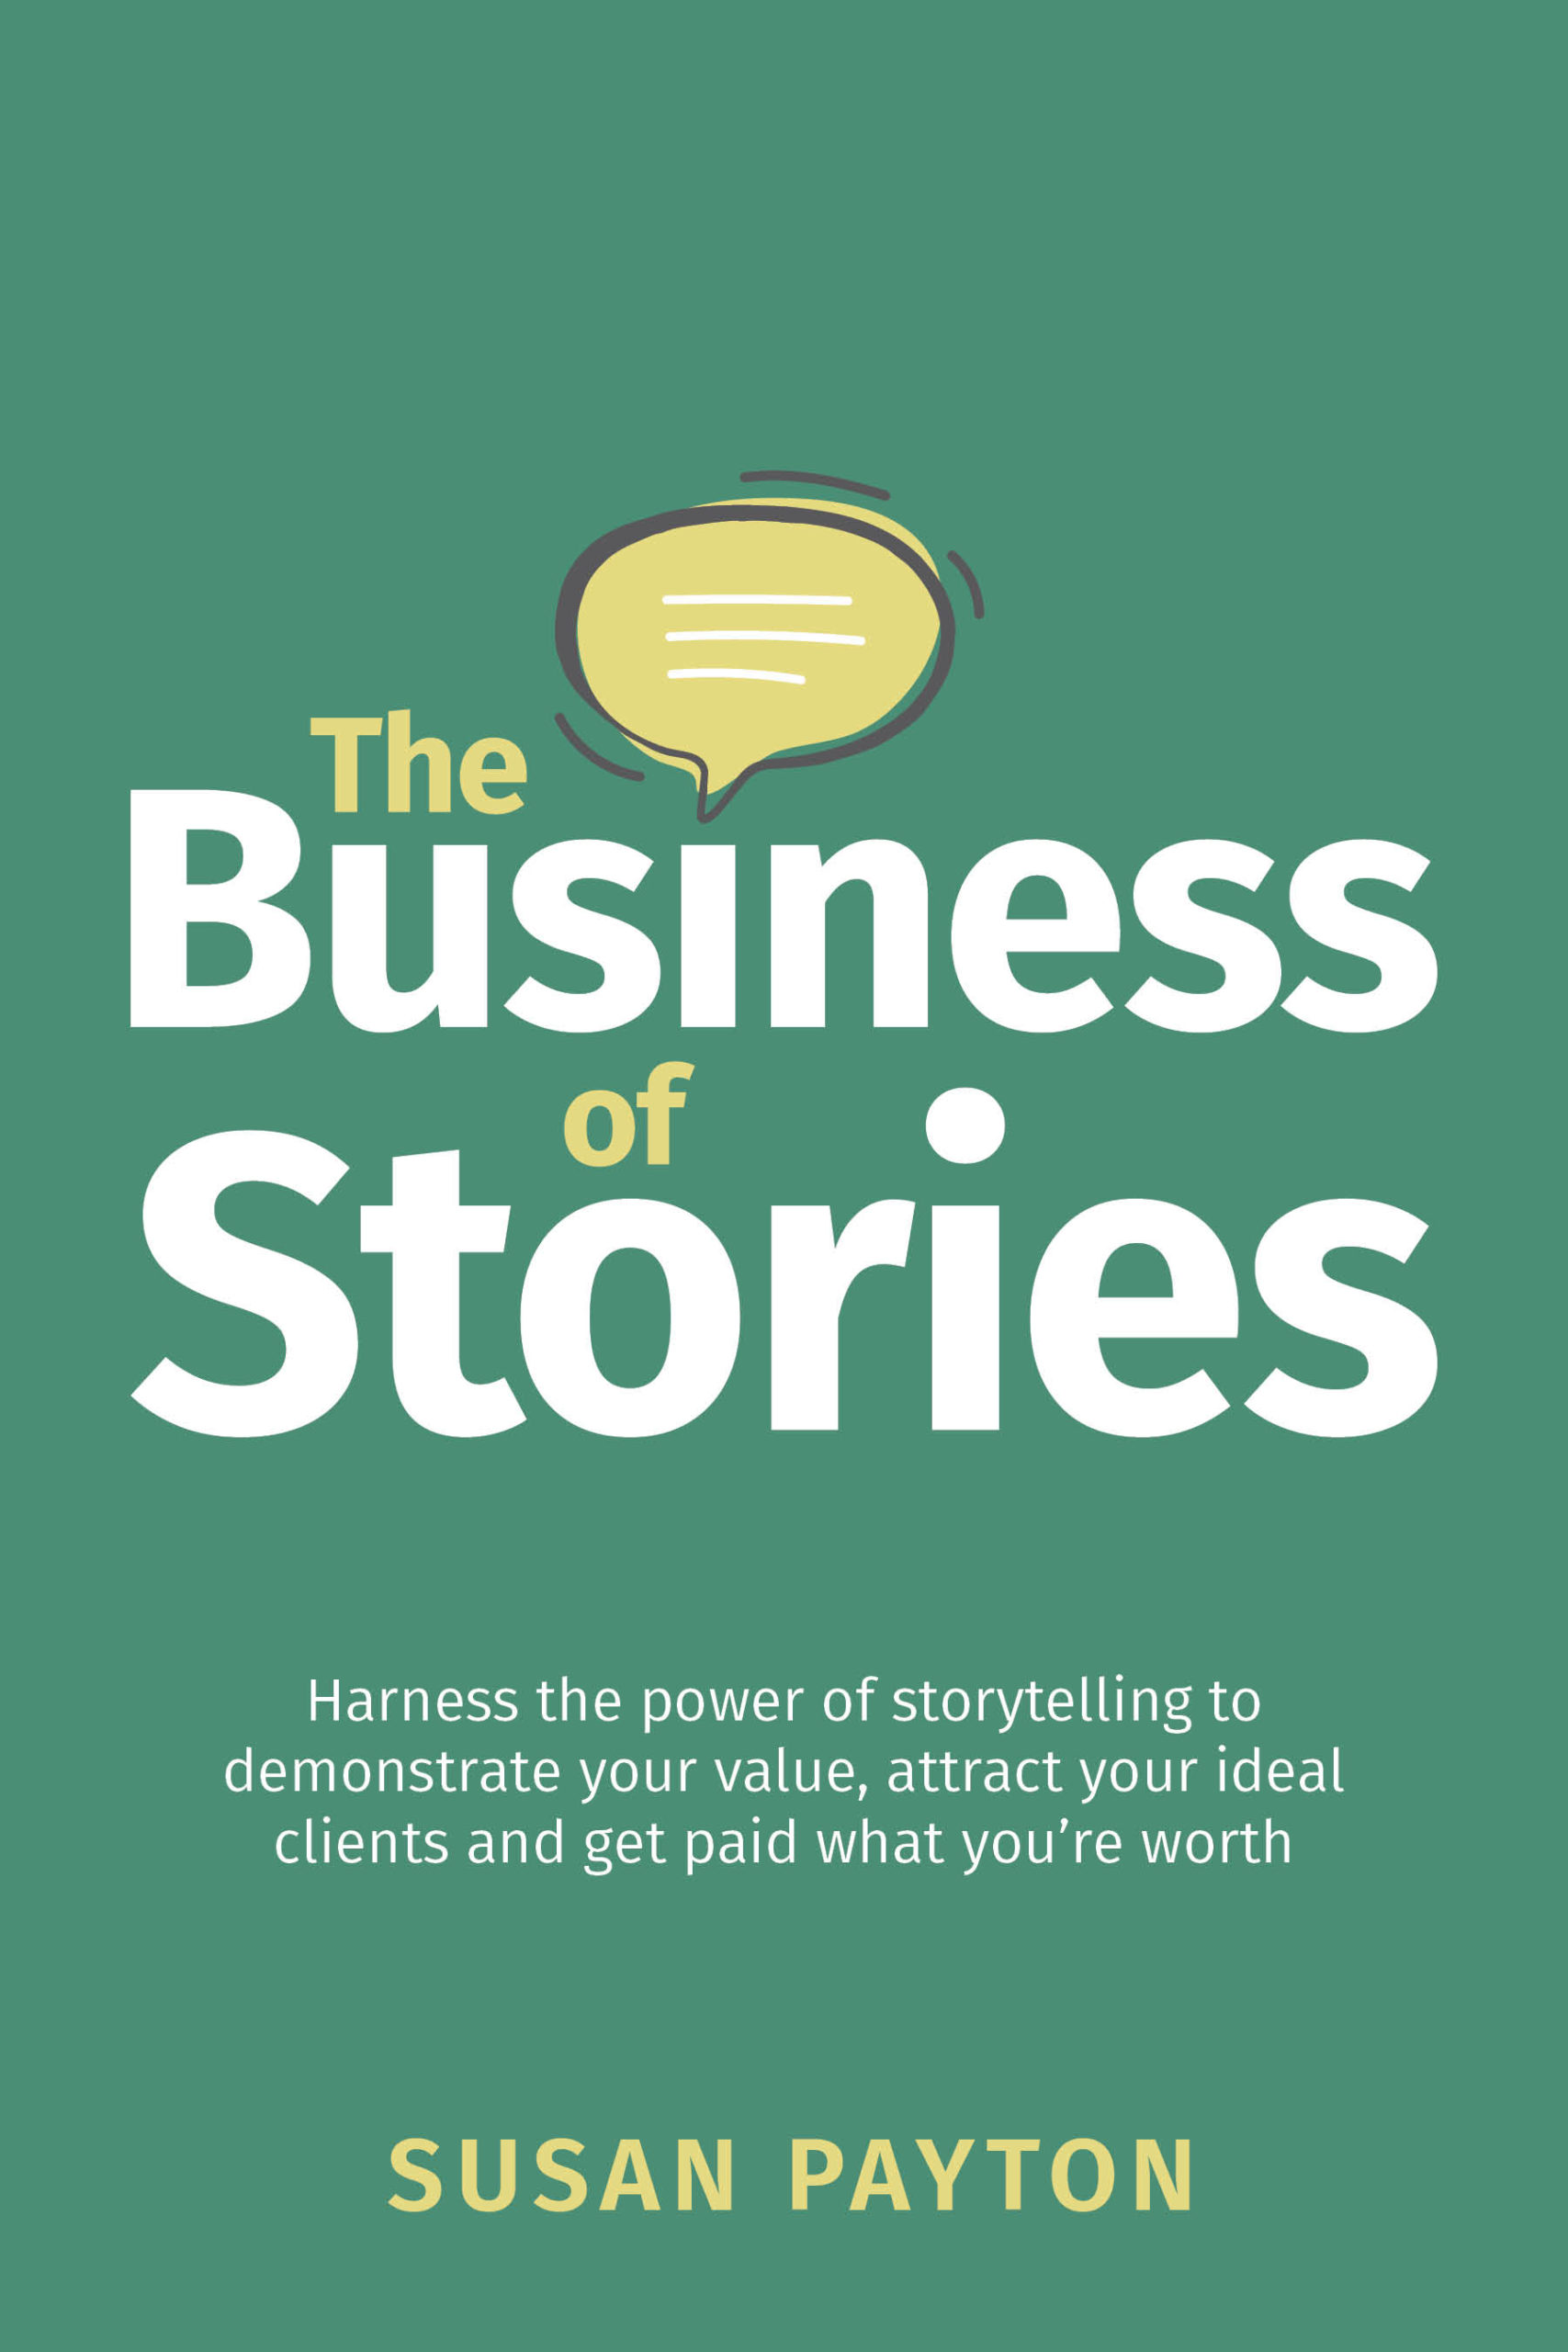 The Business of Stories